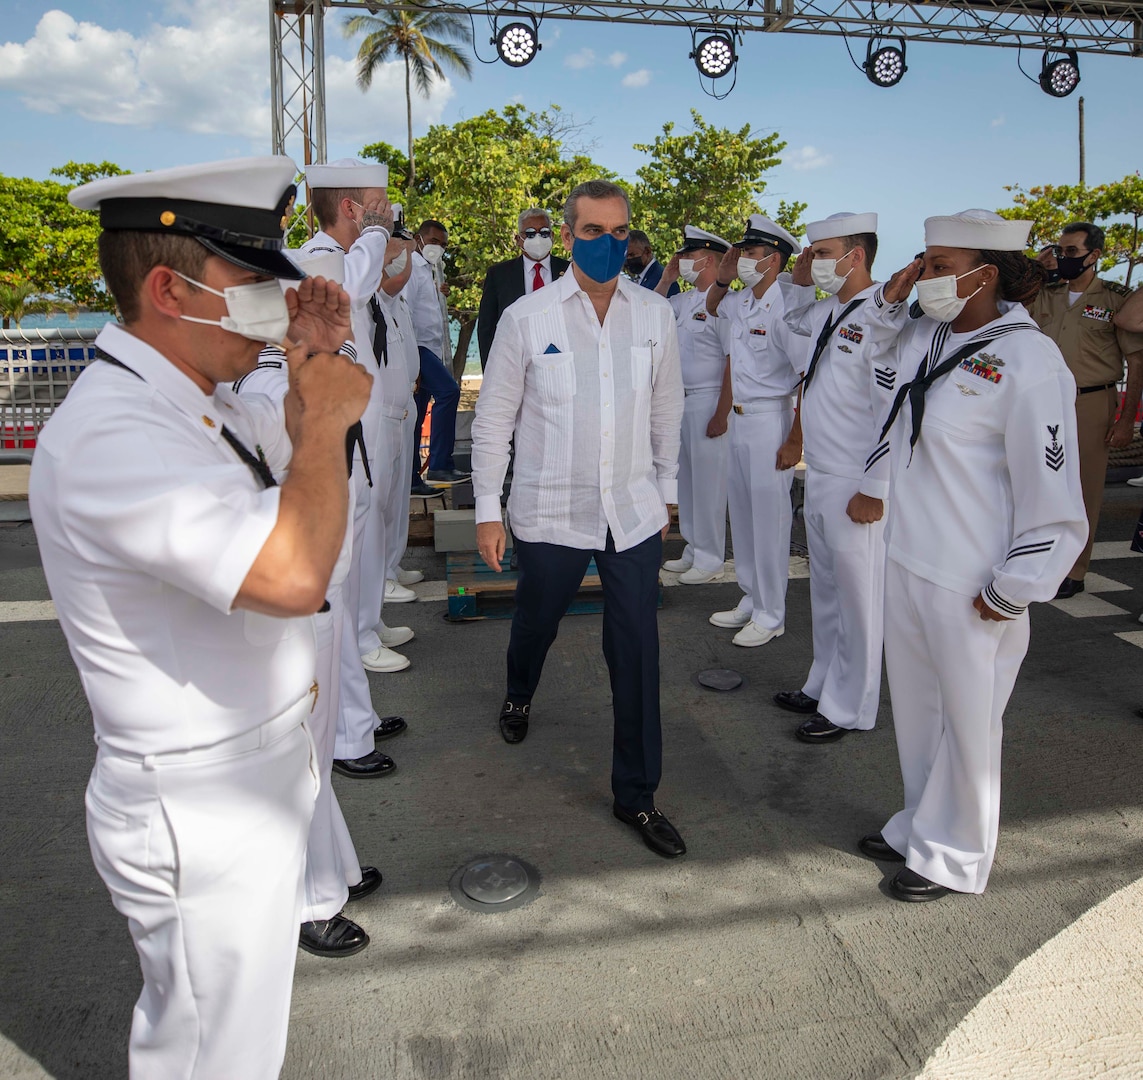 His Excellency Luis Rodolfo Abinader Corona, President of the Dominican Republic, boards the Freedom-variant littoral combat ship USS Billings (LCS 15), July 9, 2021.